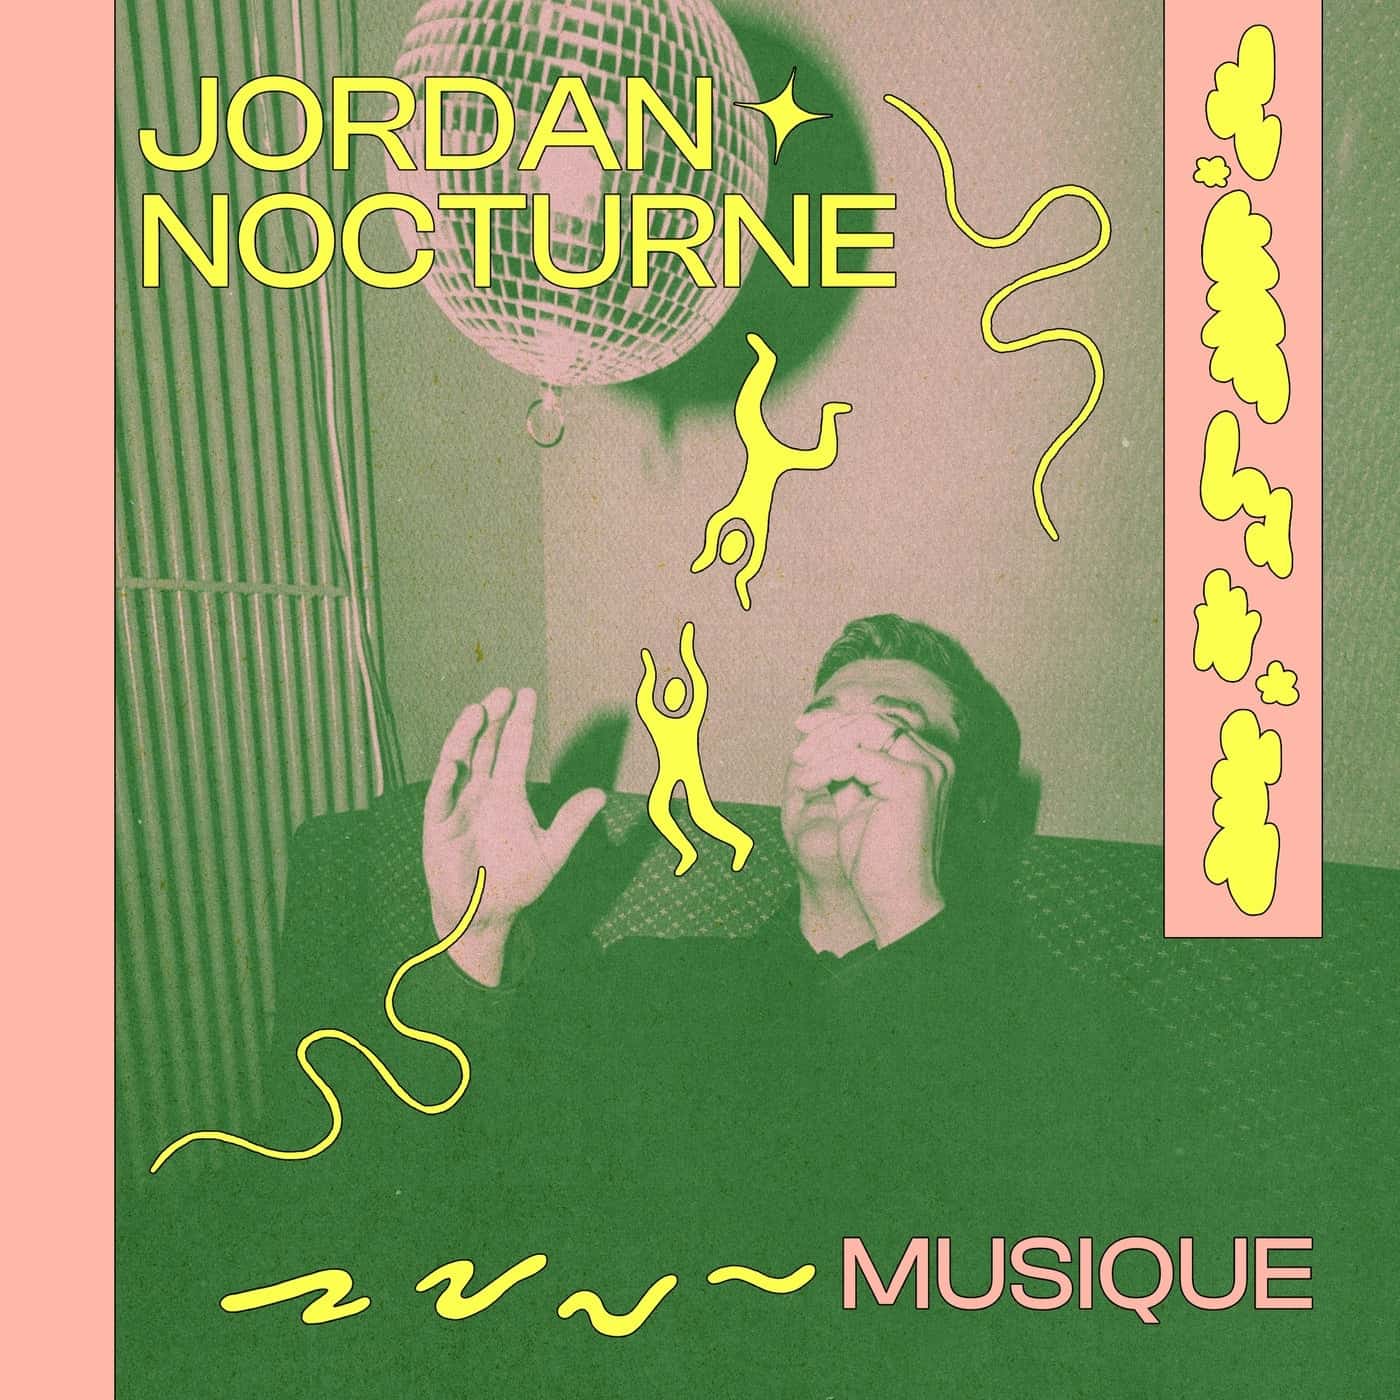 image cover: Musique by Jordan Nocturne on Permanent Vacation